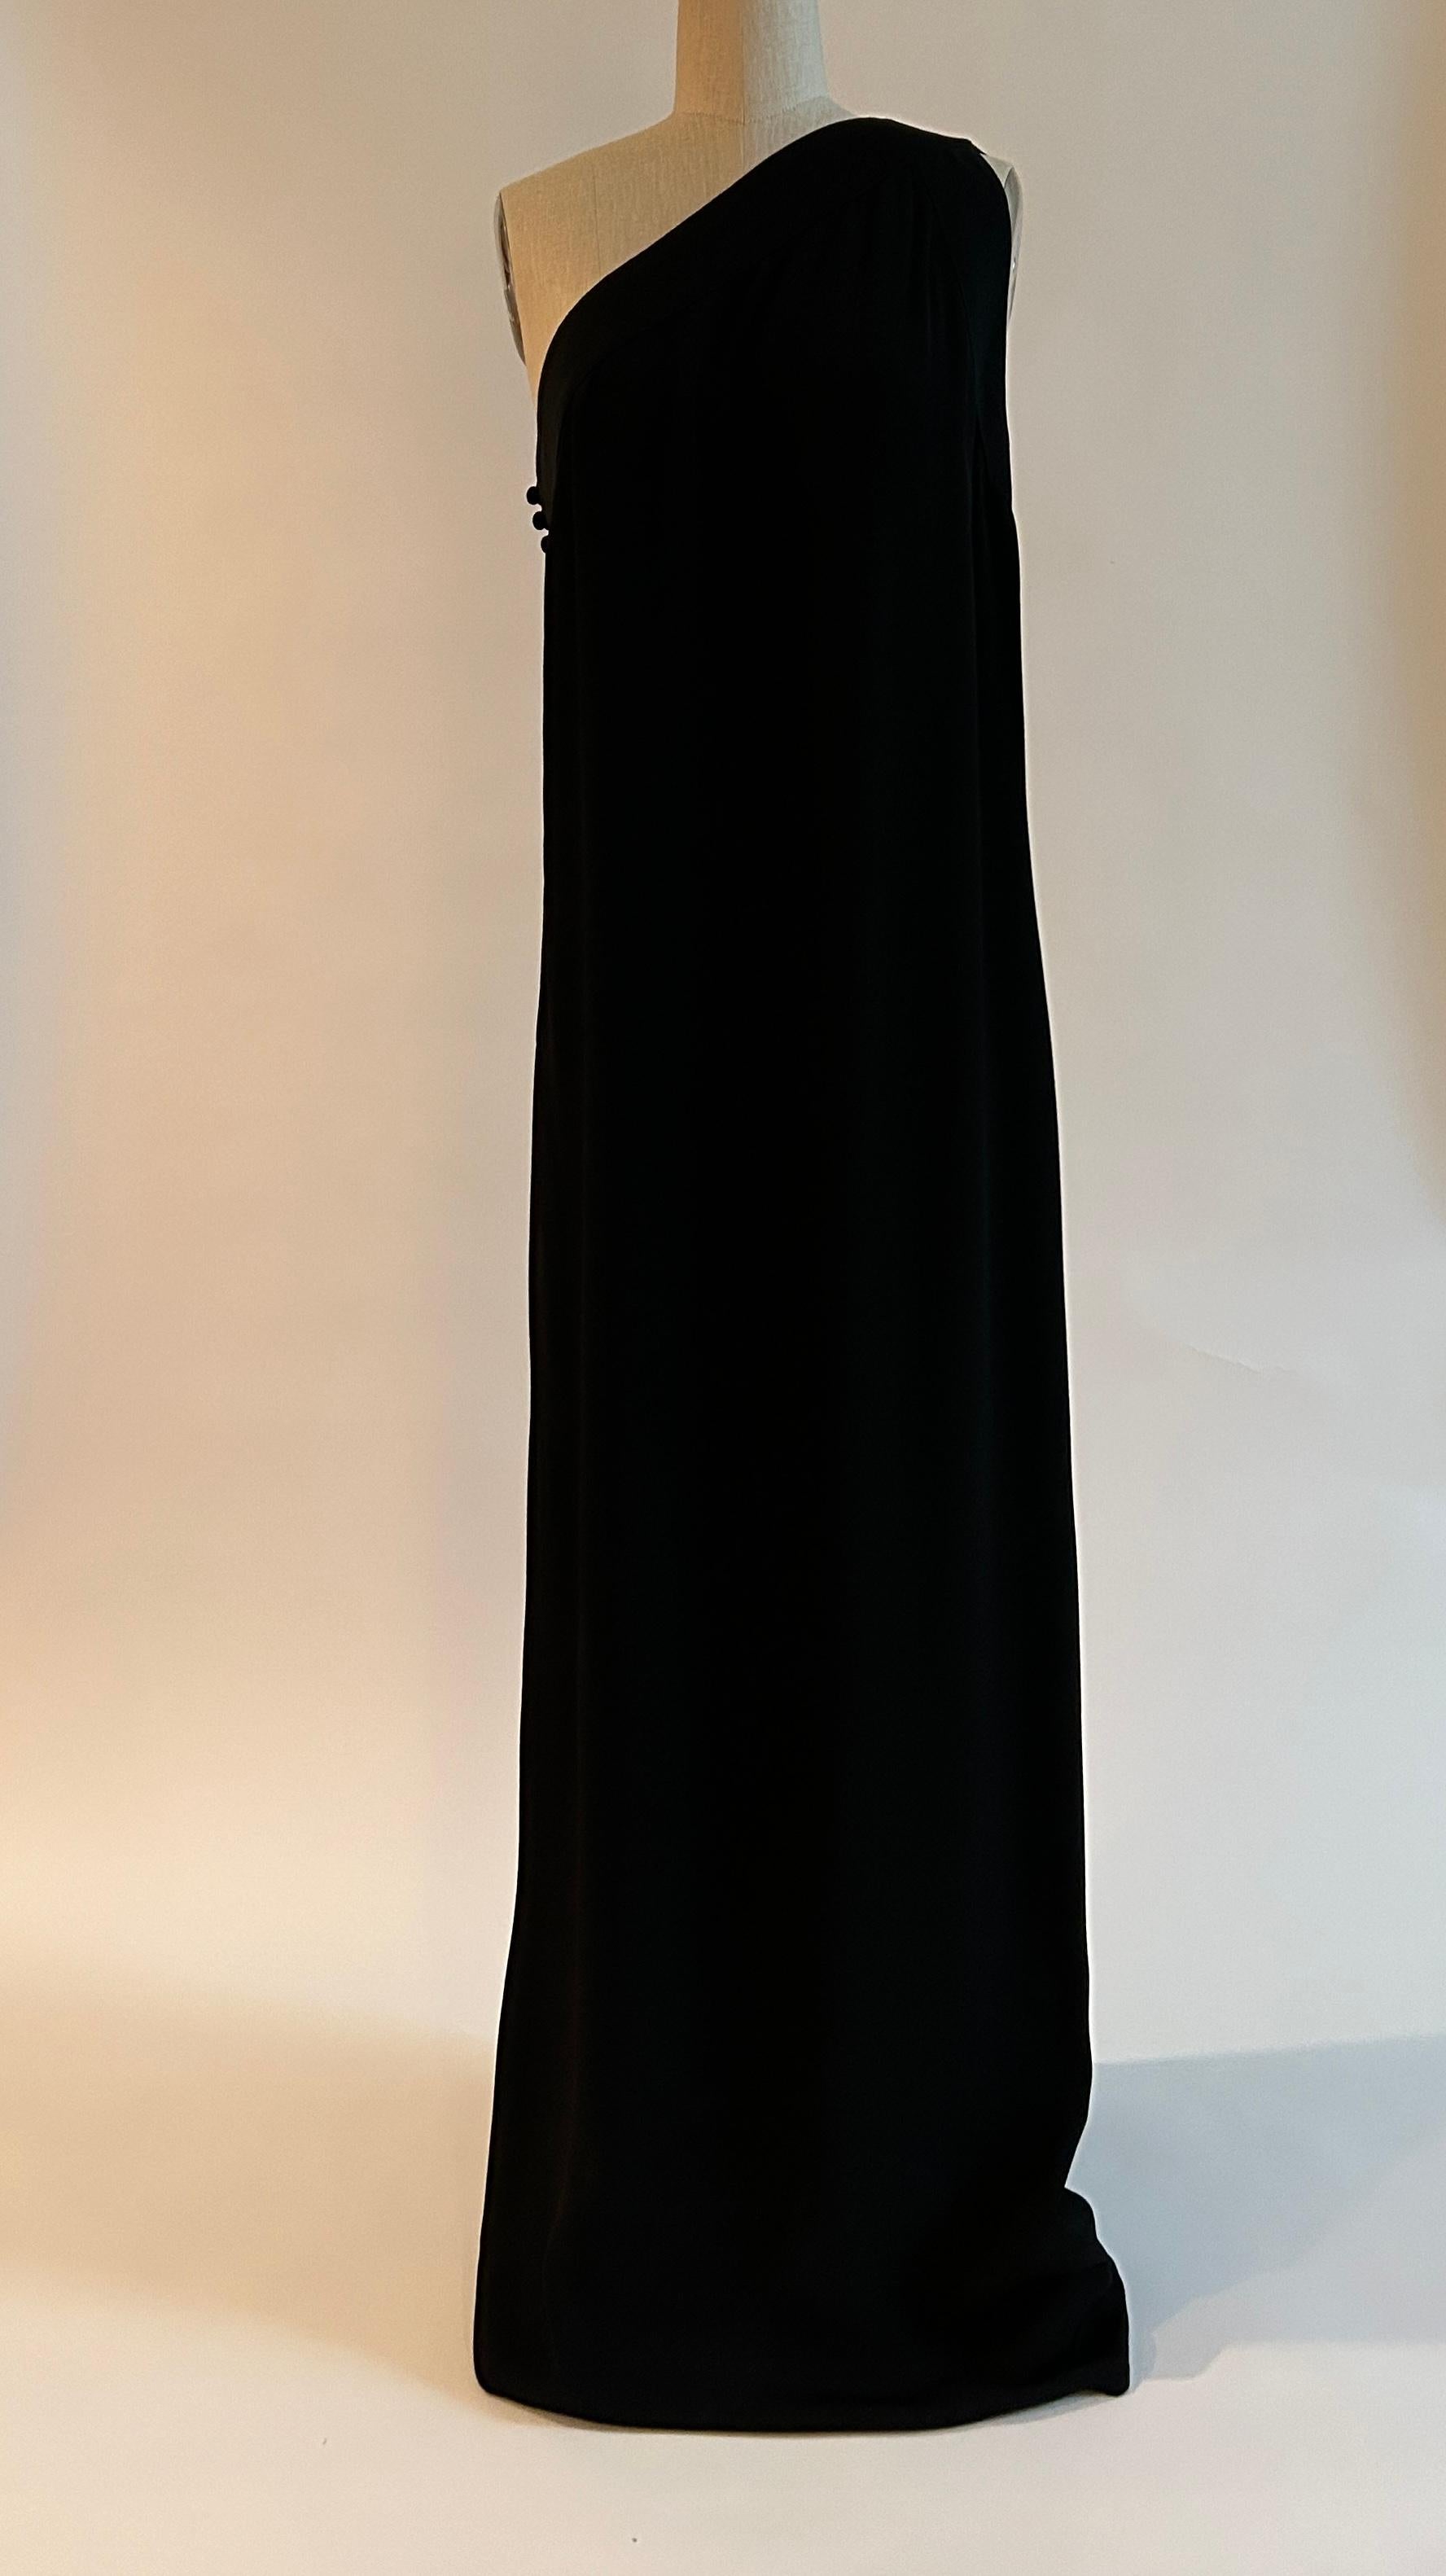 Vintage Adele Simpson black column style maxi gown with asymmetrical shoulder detailing. (Estimated circa 1970s, based on red and blue union label.) Straps fasten at one side and cross over shoulder to attach at two separate places at slightly